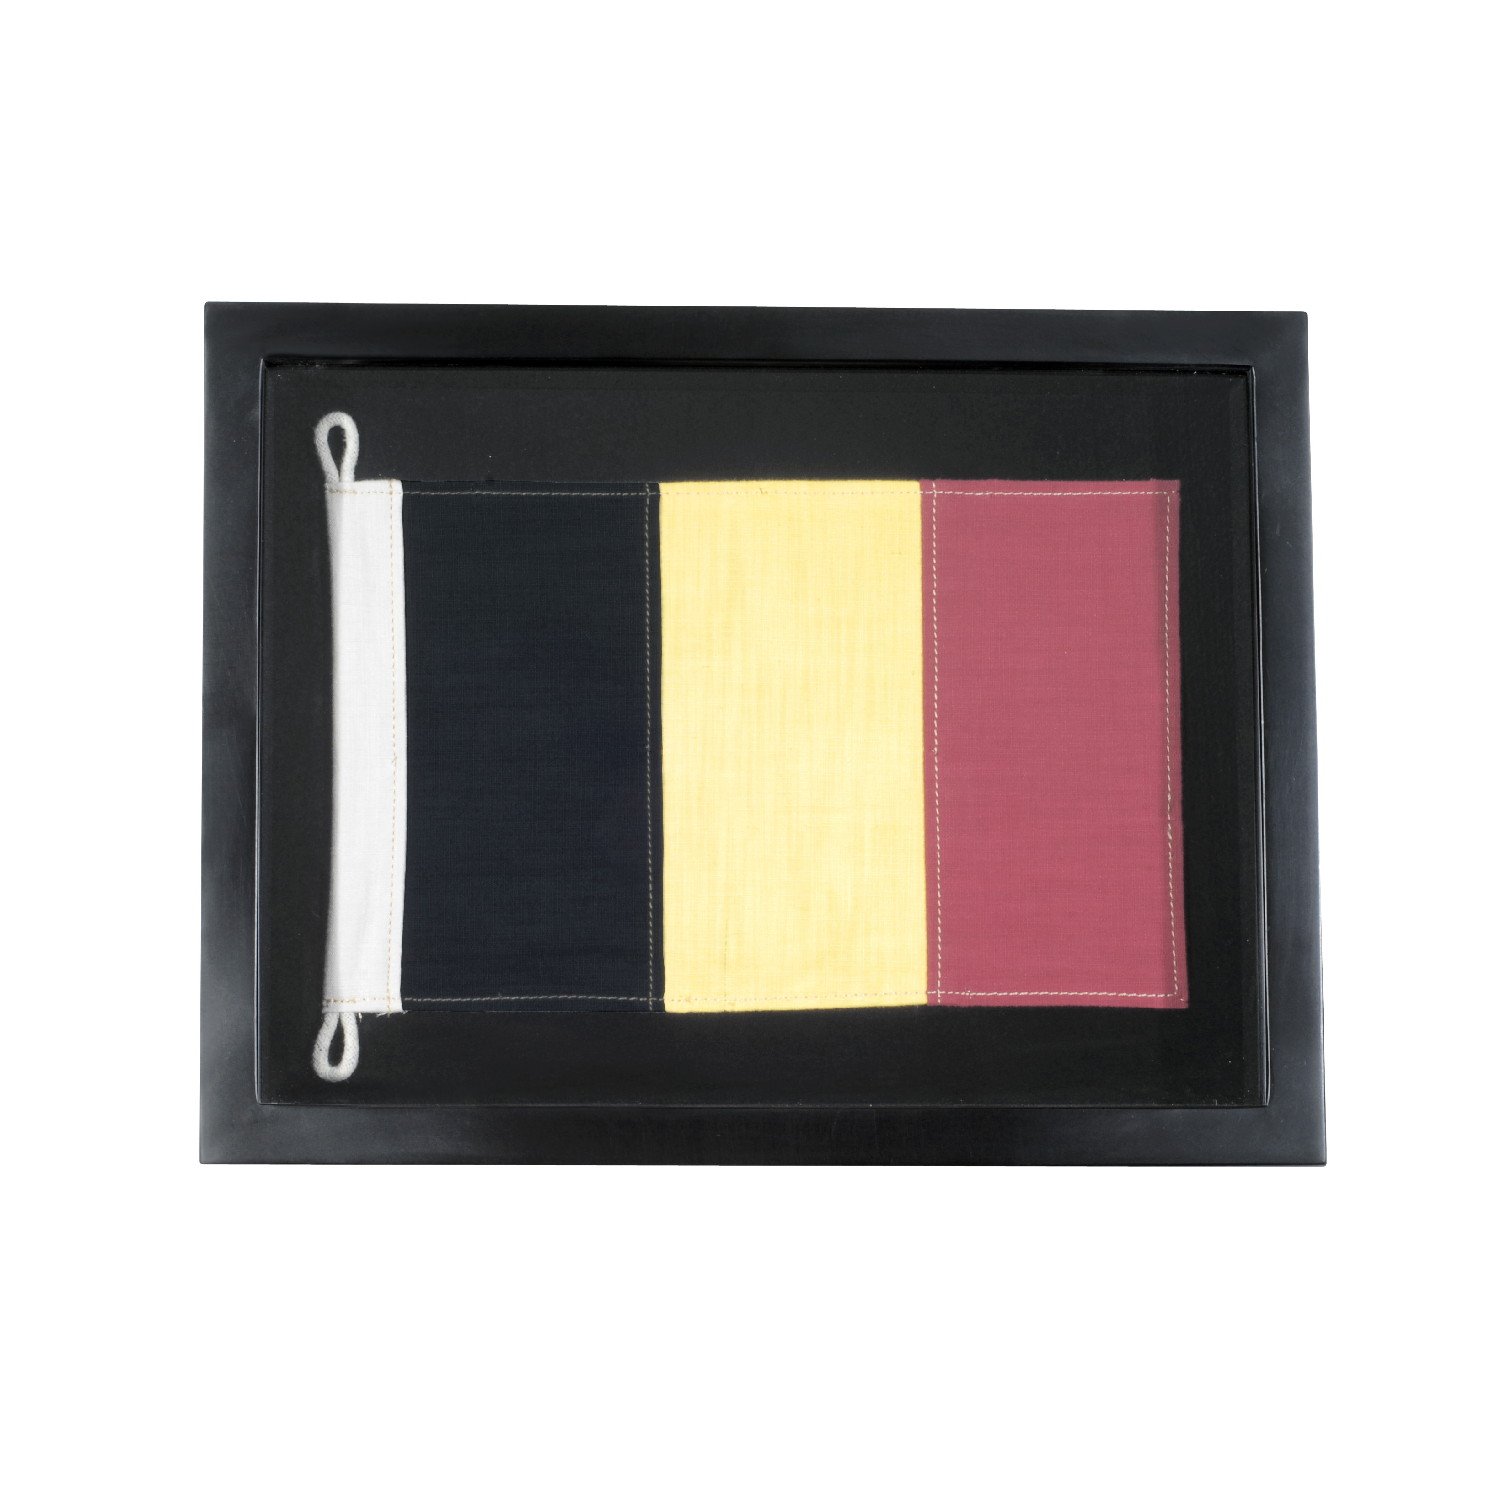 Photo of Timothy oulton flag shadow box mini 45x35cm print in square in red